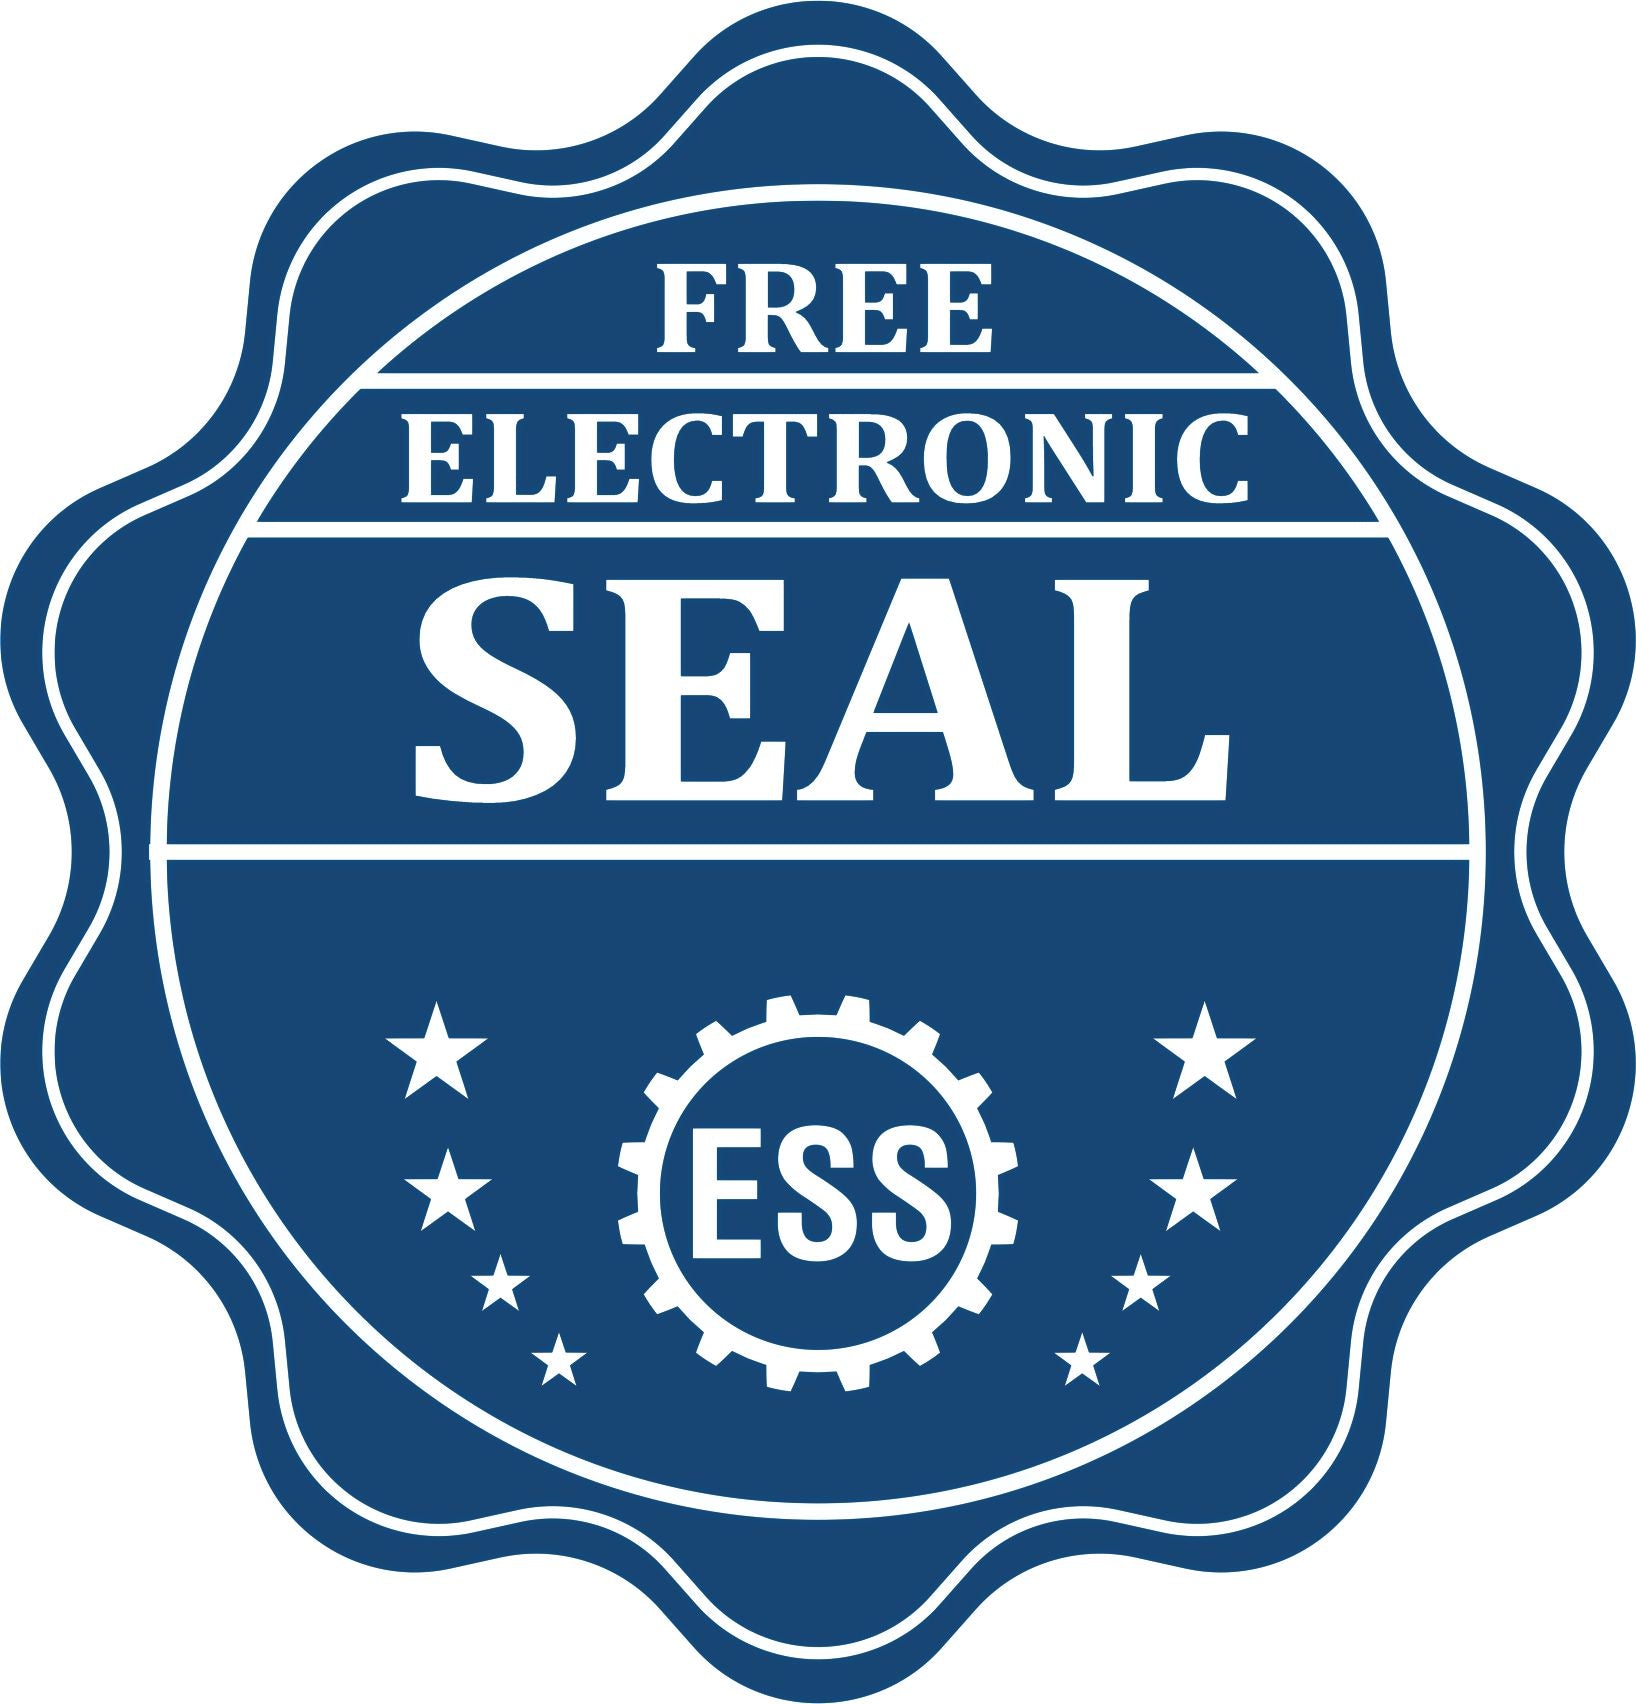 A badge showing a free electronic seal for the Super Slim South Dakota Notary Public Stamp with stars and the ESS gear on the emblem.